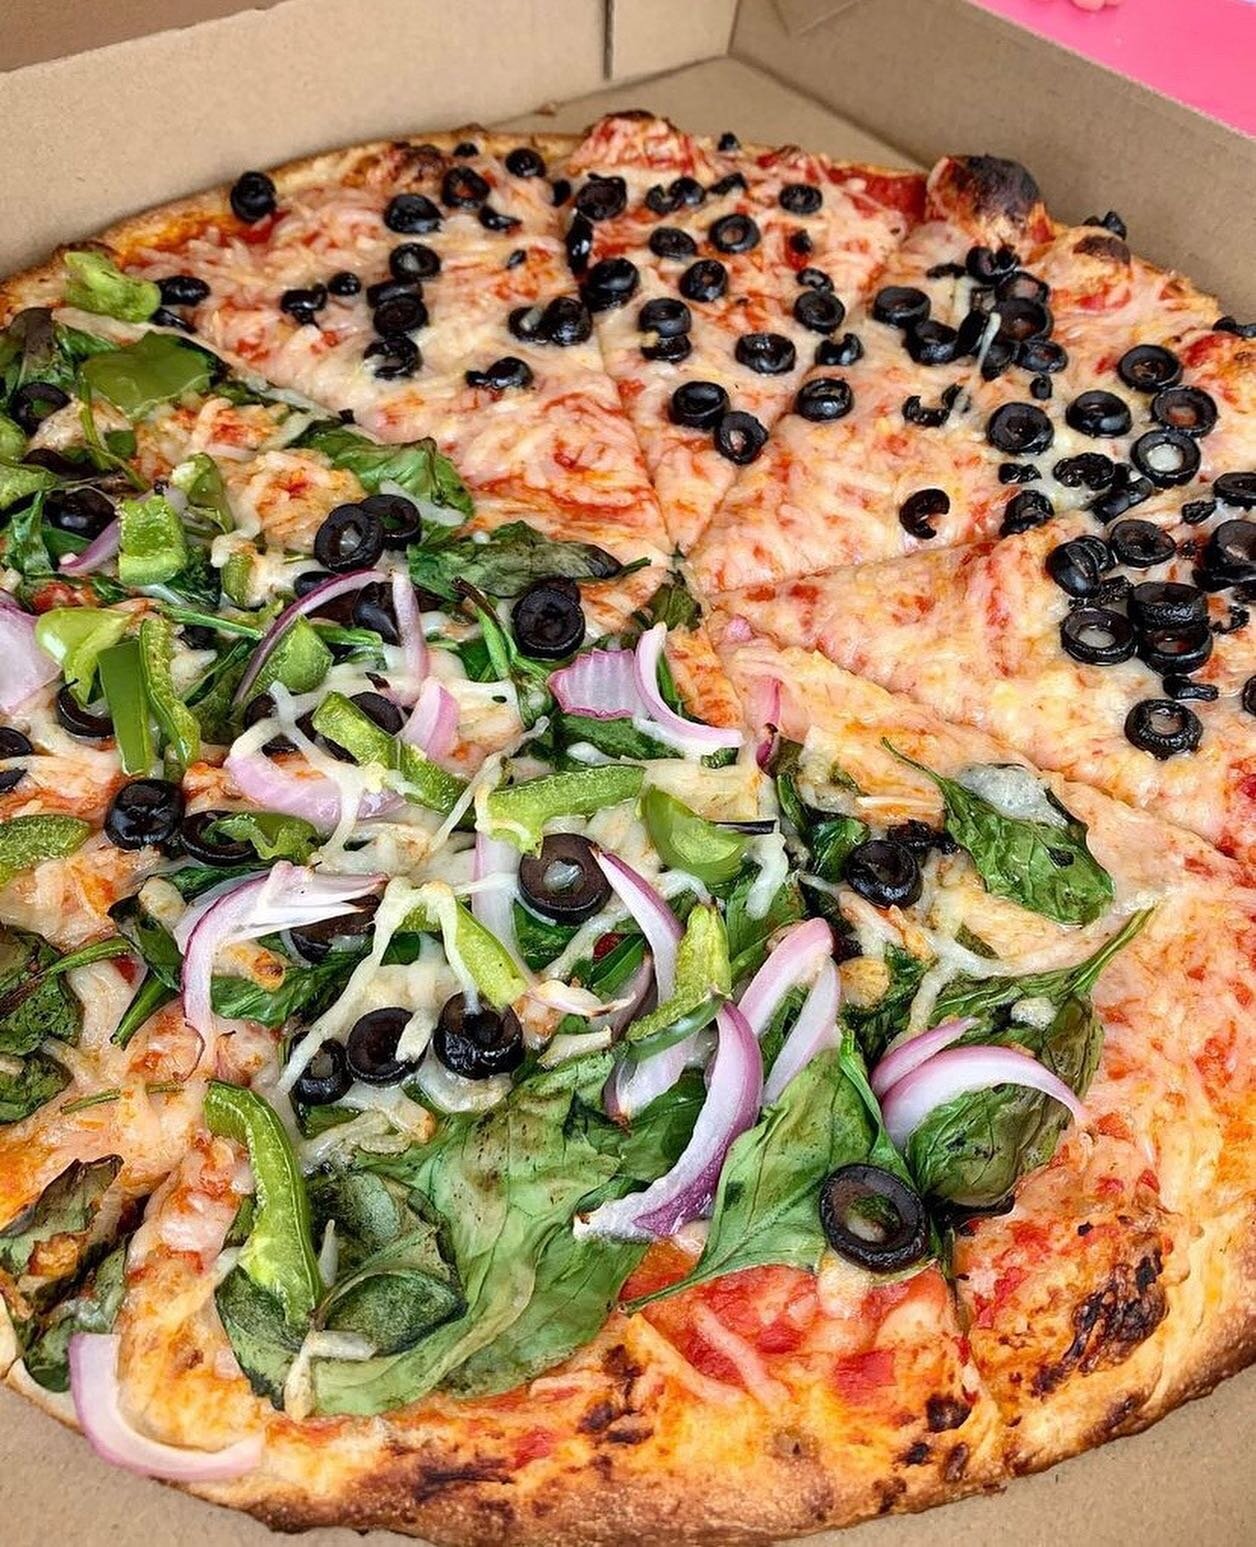 We've got you covered on your pizza and garlic knots cravings. From vegan to gluten-free, we've got a tasty option for everyone. 
⠀⠀⠀⠀⠀⠀⠀⠀⠀
We're loving these customer photos from @dmv_vegan! 🌱
⠀⠀⠀⠀⠀⠀⠀⠀⠀
FREE delivery Nags Head / www.villagepizzaobx